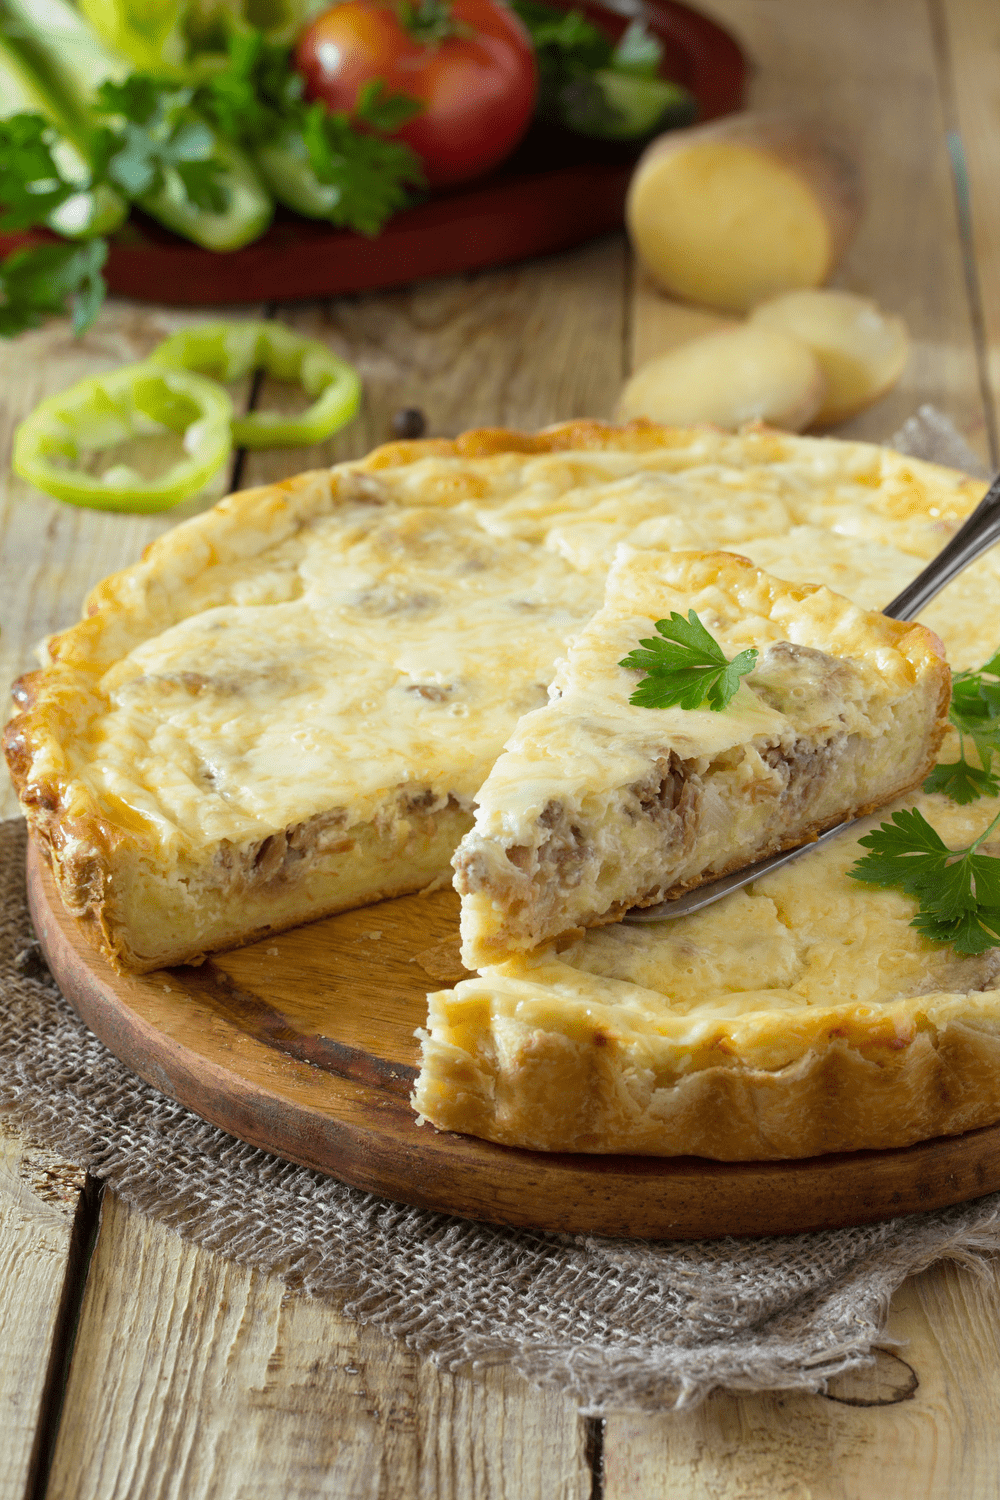 Pie with ground beef garnished with celery leaves served on a wooden cutting board